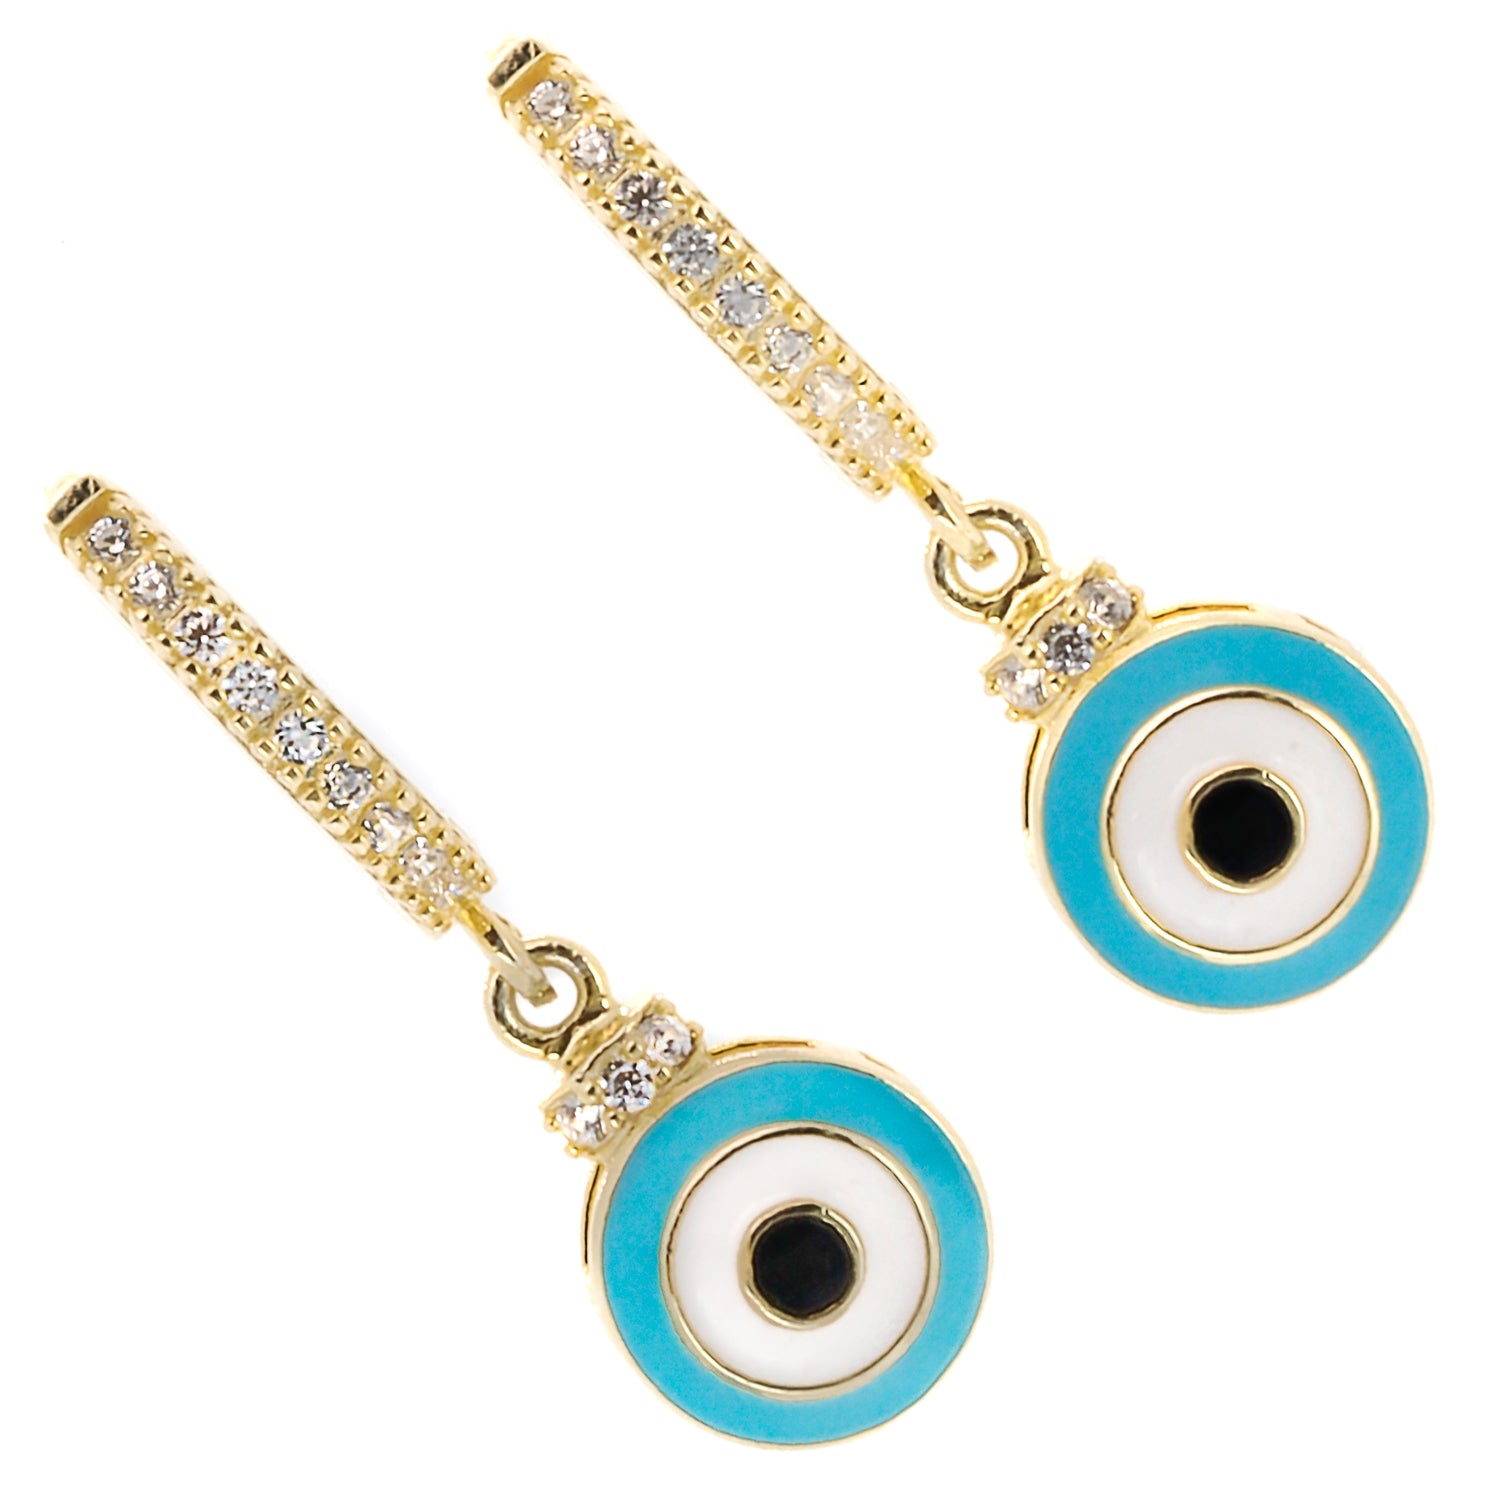 Dainty and elegant earrings adorned with turquoise enamel and zircon stones